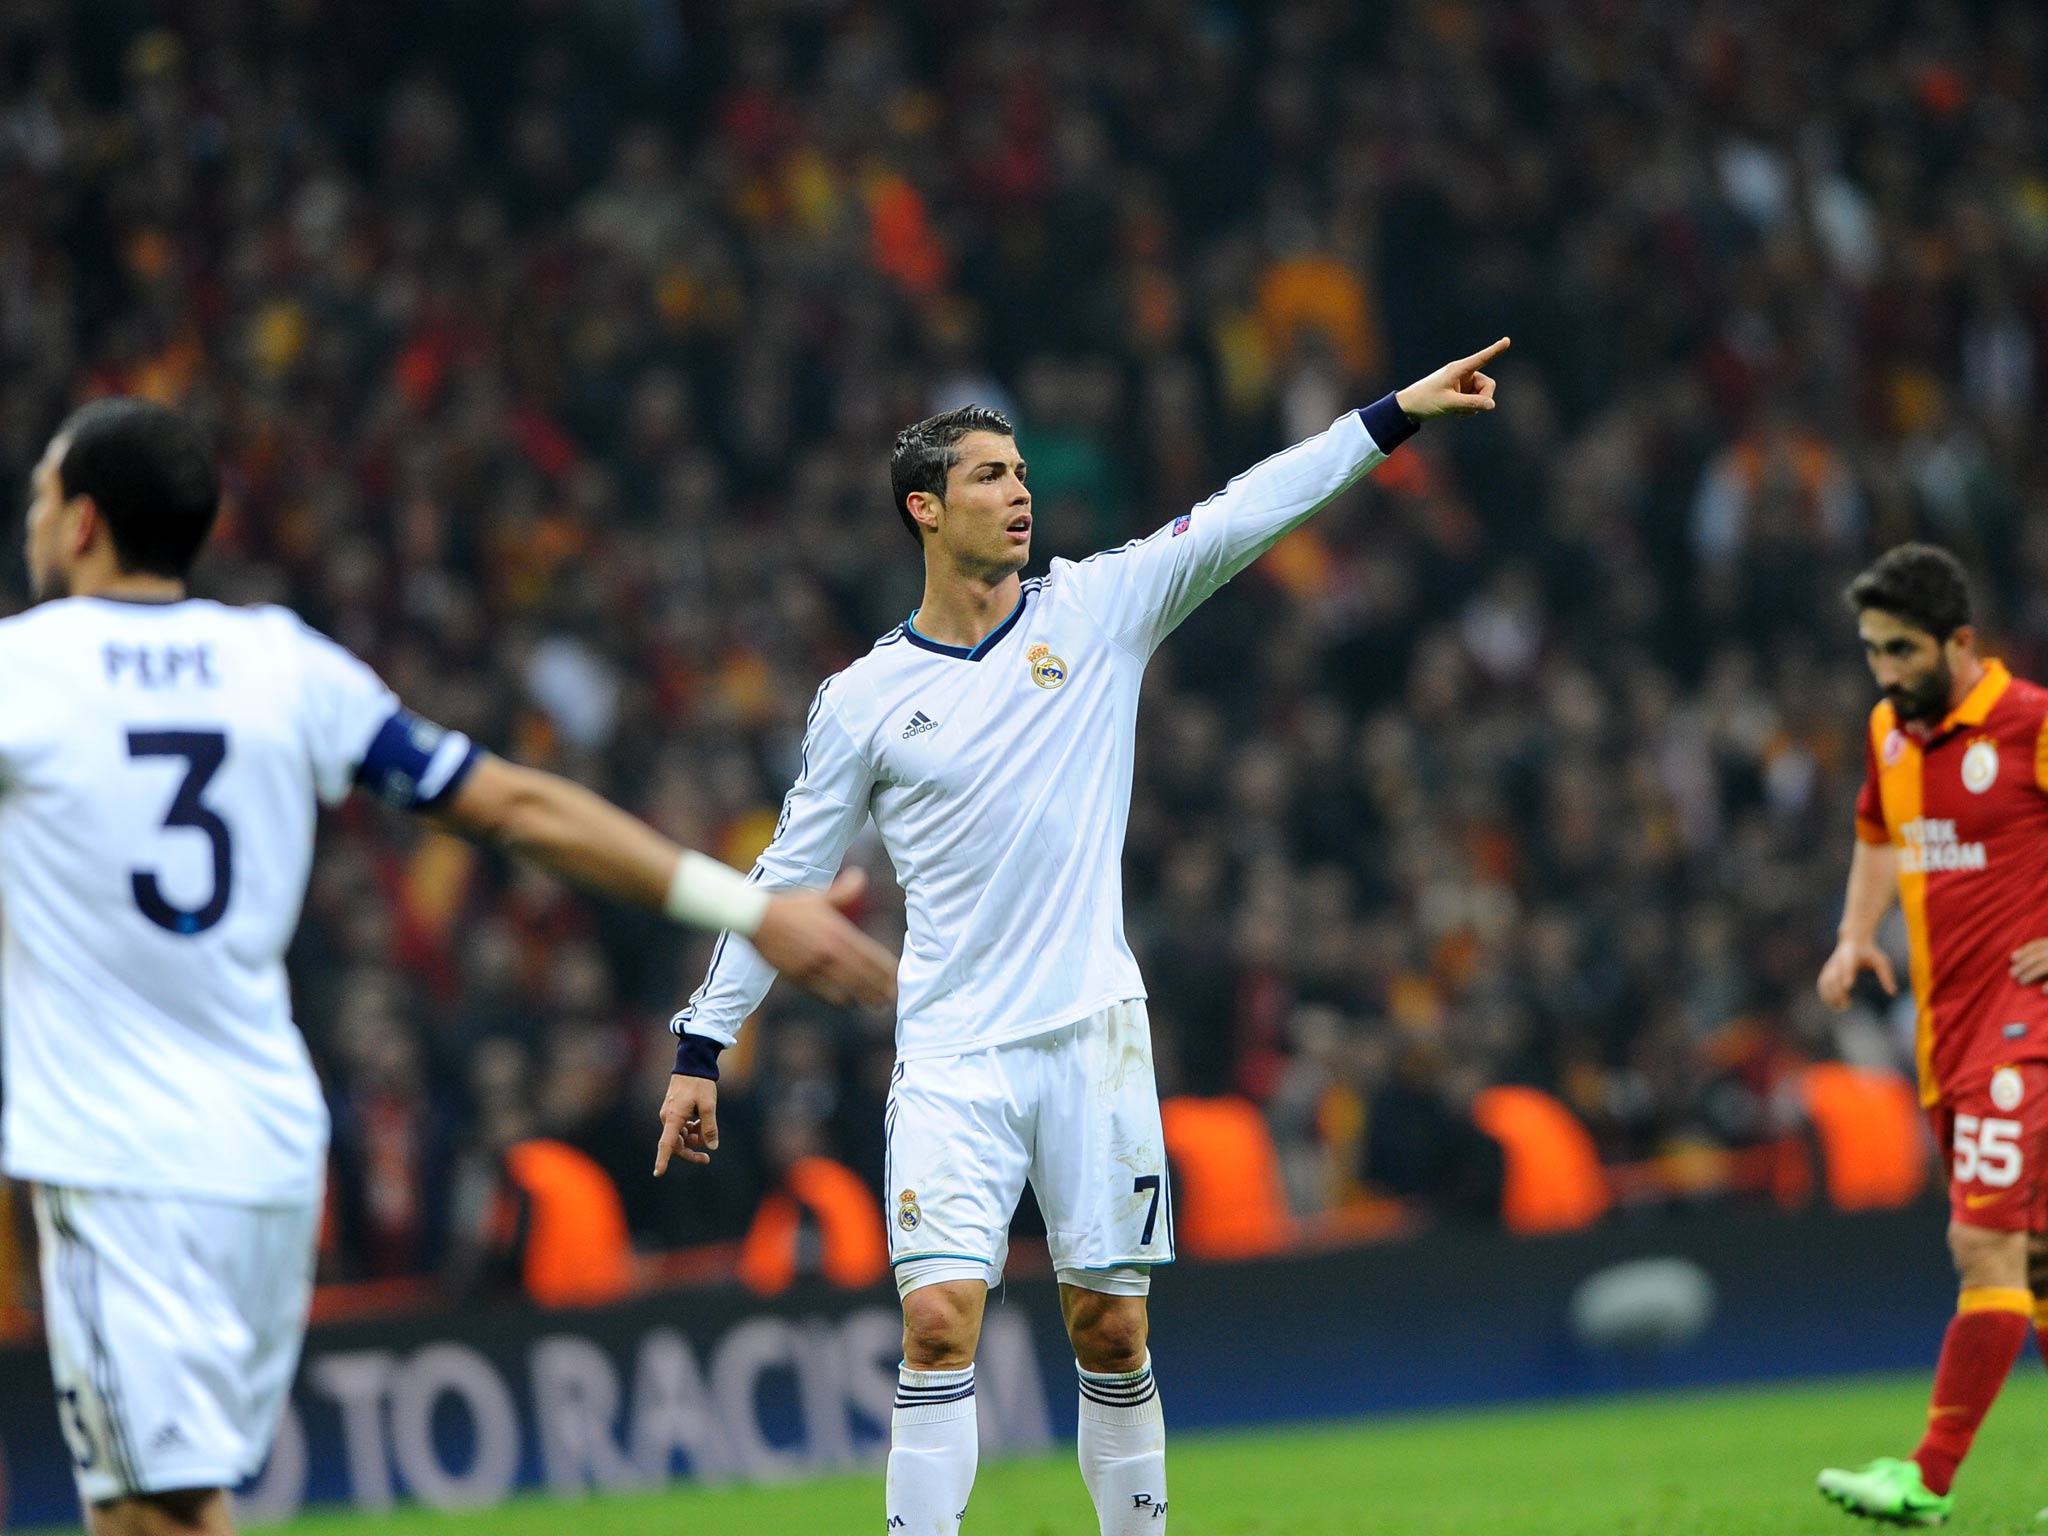 Cristiano Ronaldo celebrates one of his two goals for Real Madrid in their Champions League tie against Galatasaray